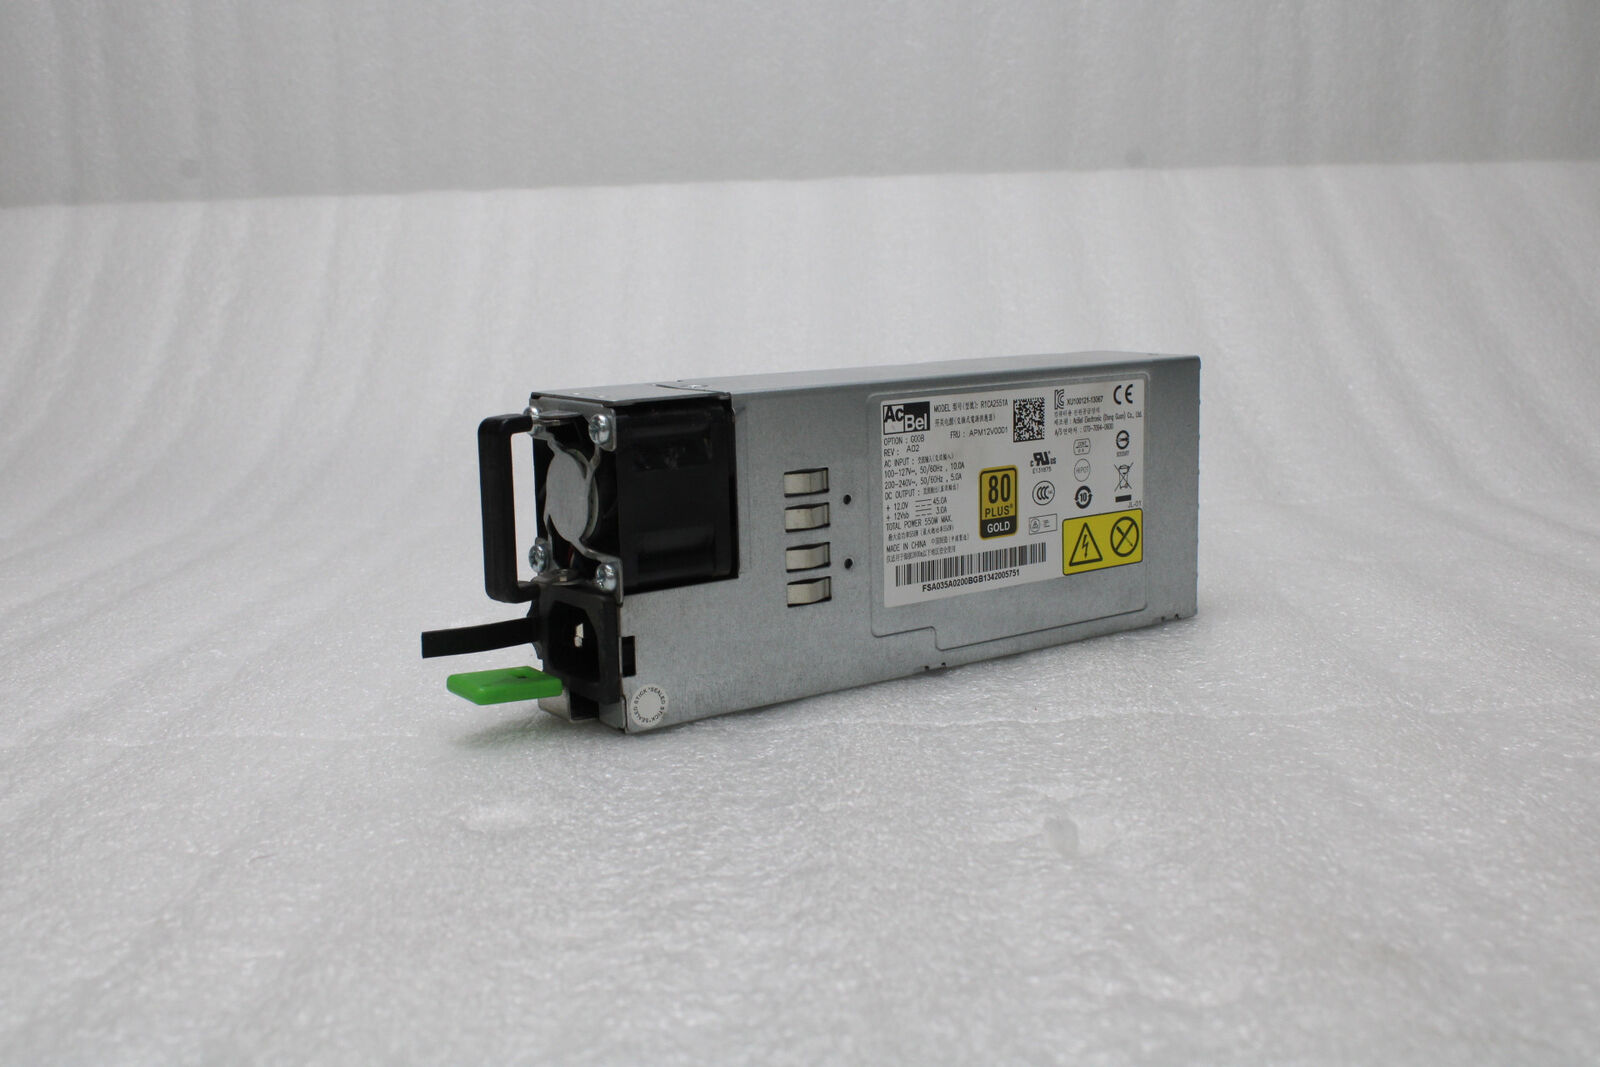 AcBel 550W Server Power Supply Unit R1CA2551A Rev: A02 80 Gold Plus AS-IS